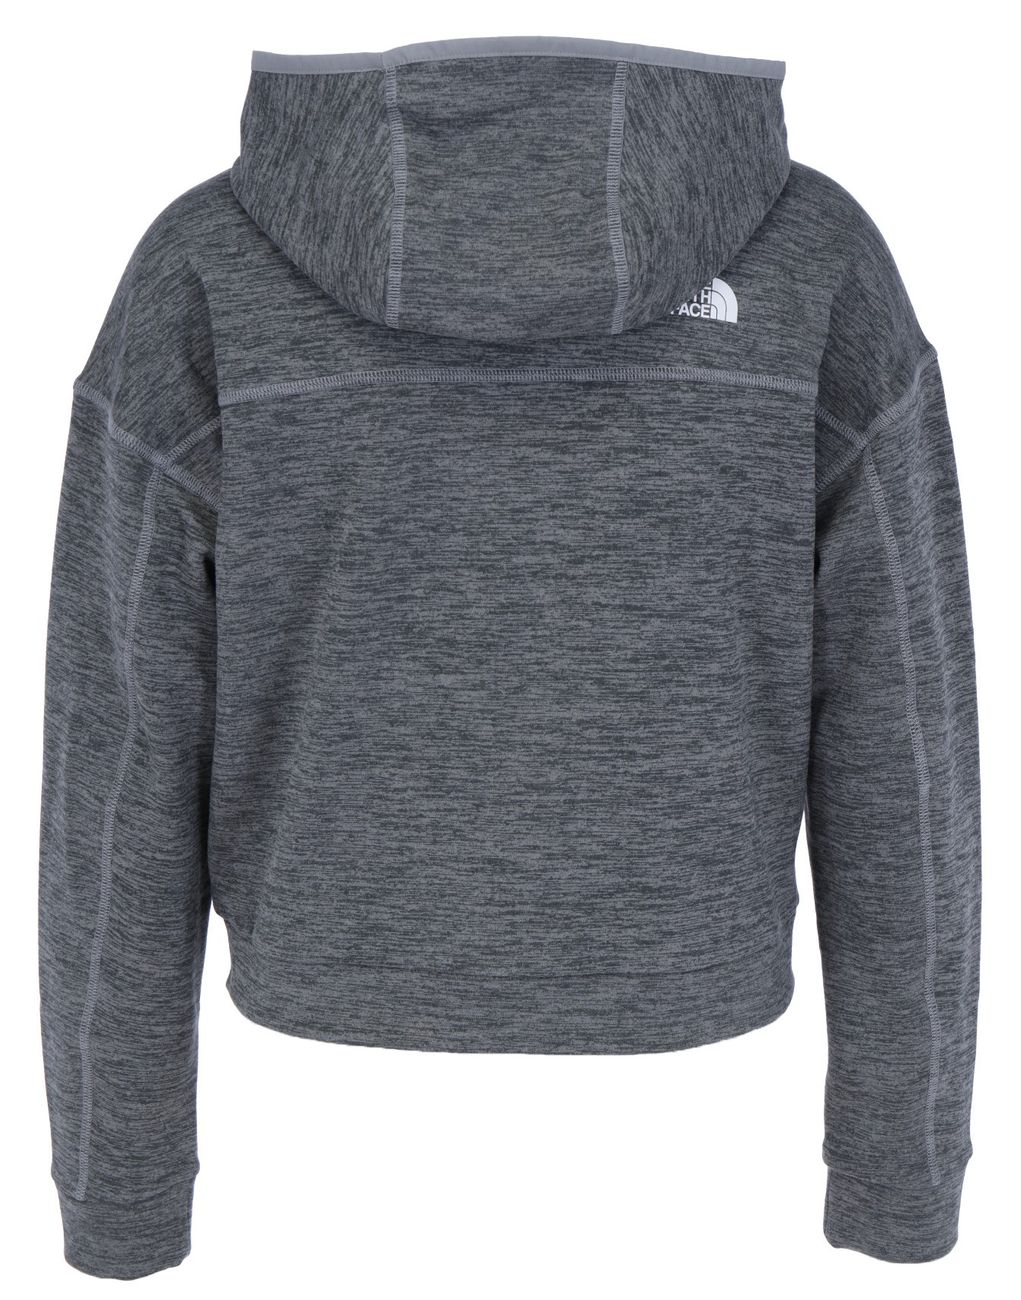 THE NORTH FACE CANYONLANDS PO CROP Damen Hoodie - The North Face - SAGATOO - 195438195593